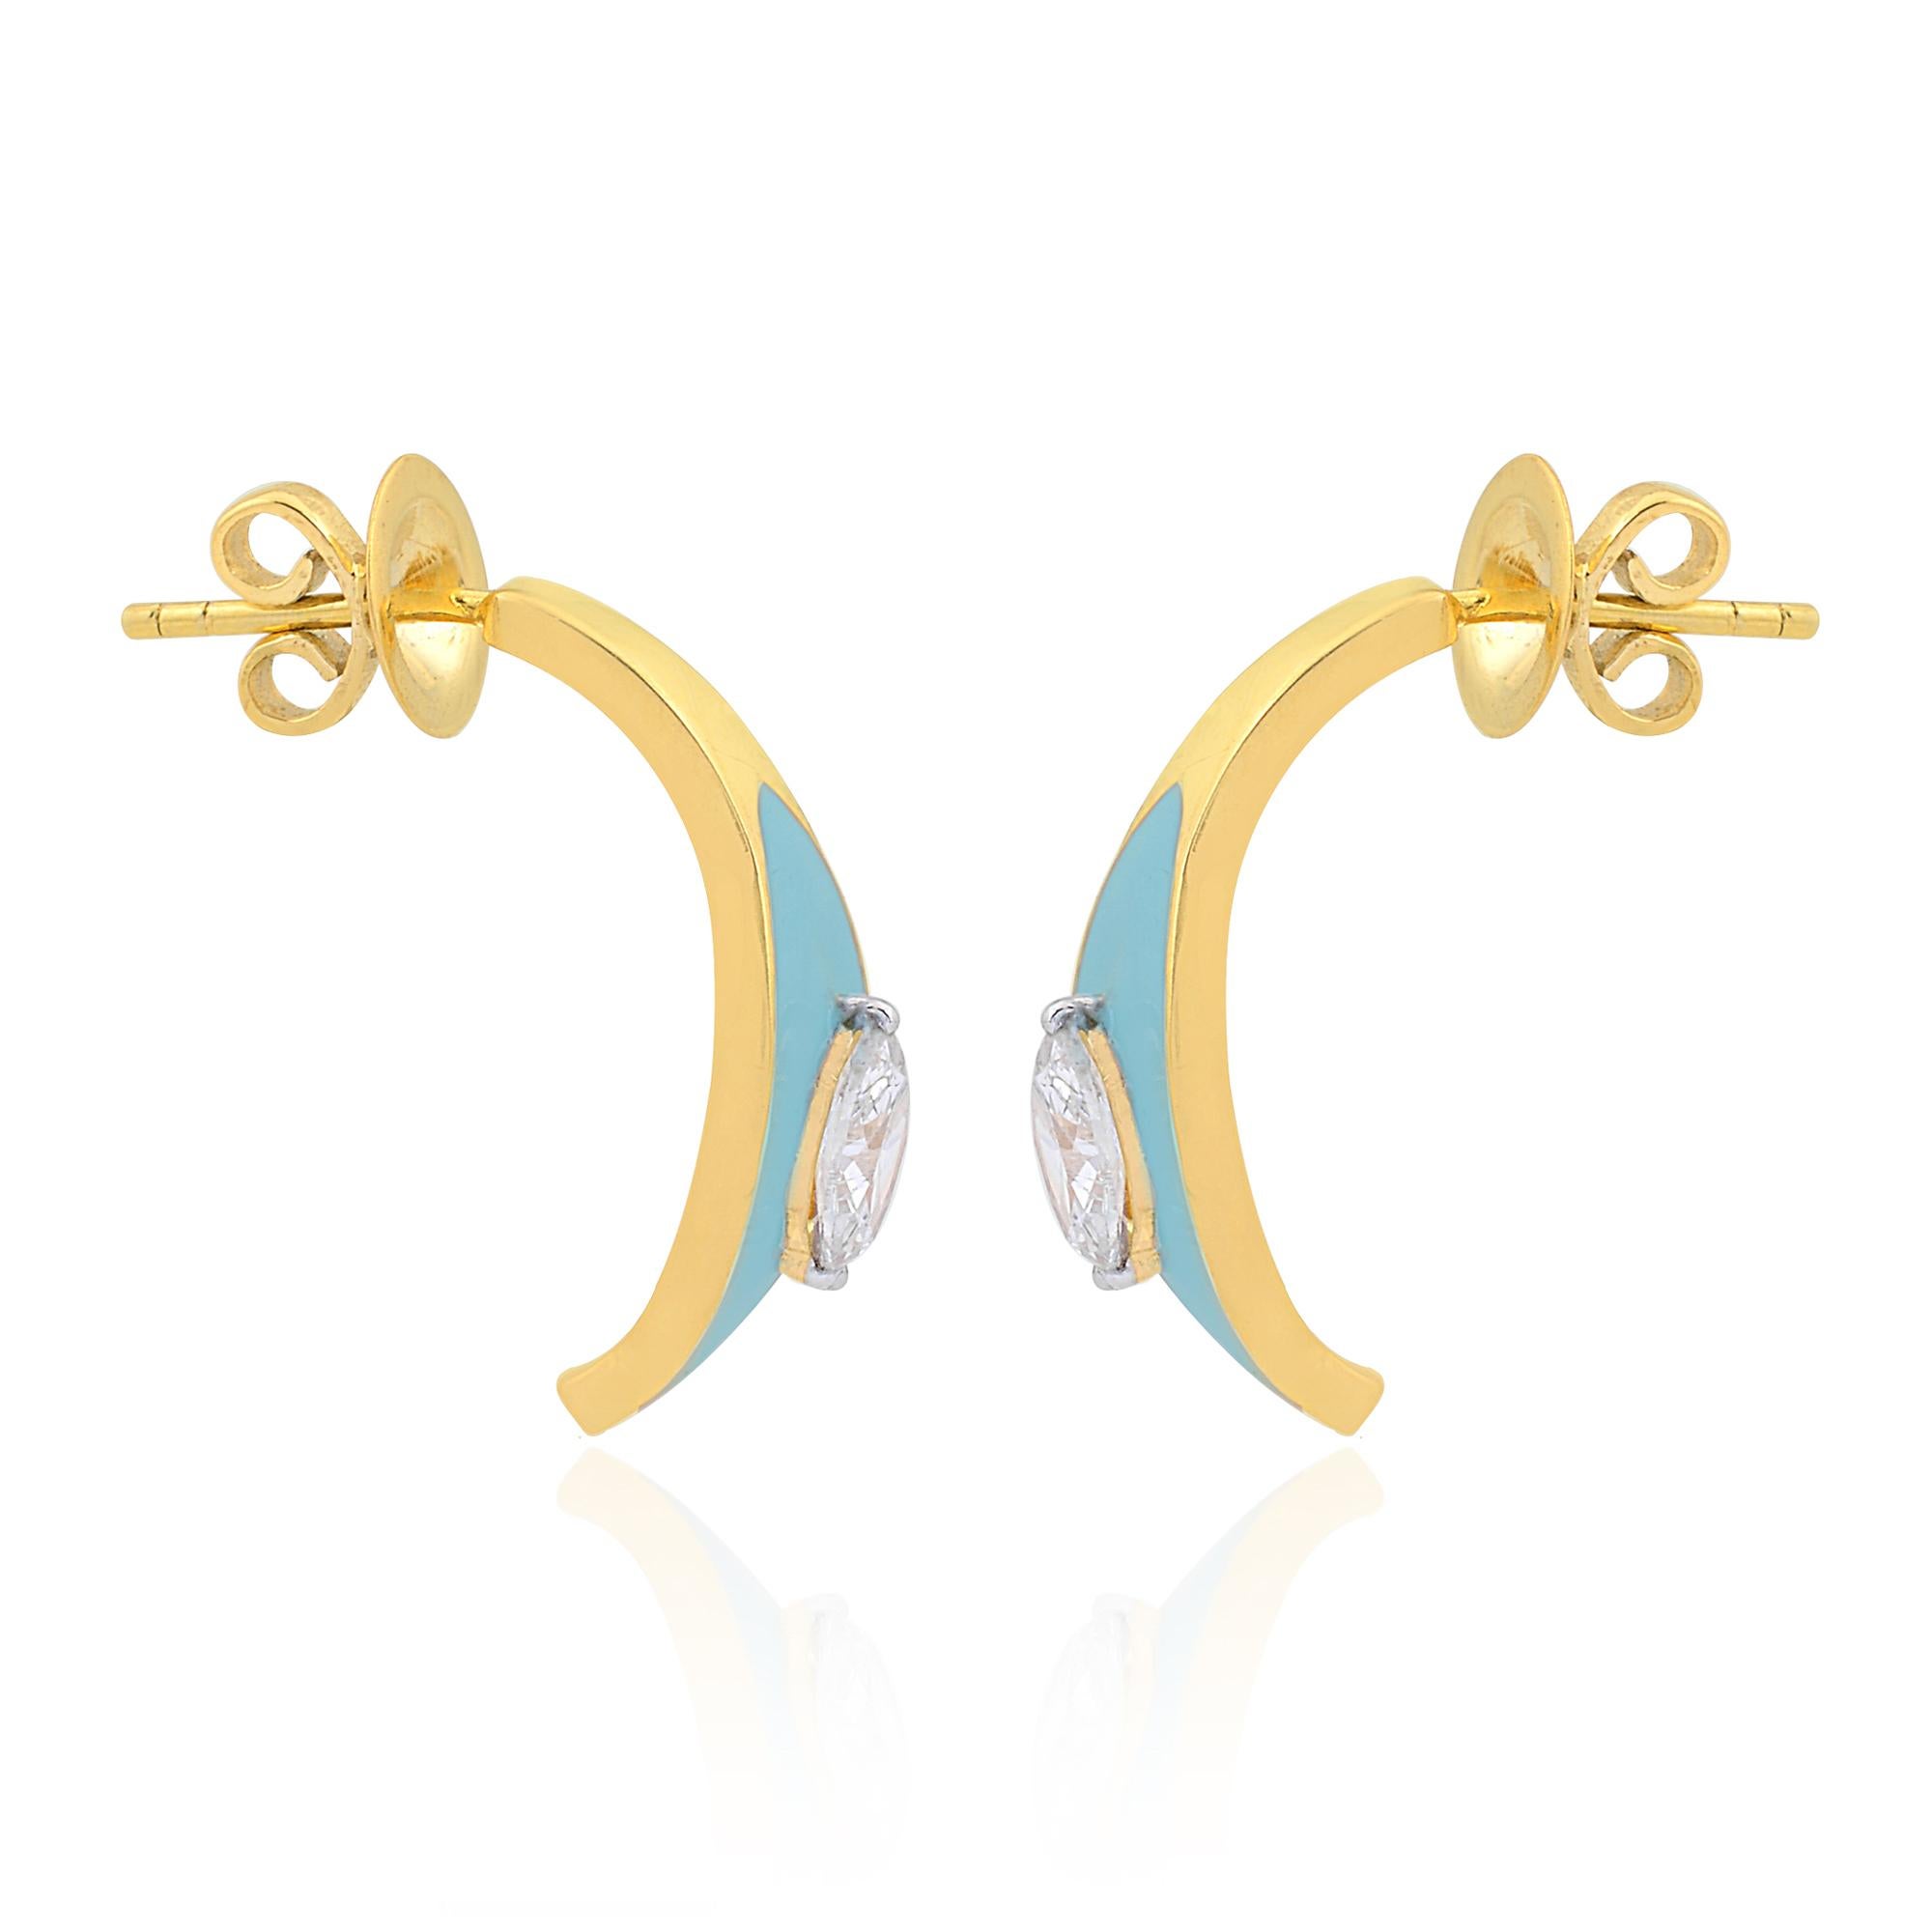 Adorn yourself with elegance and sophistication with these stunning 0.75 Carat Marquise Diamond Turquoise Enamel Half Hoop Earrings in 18k Yellow Gold. Crafted with meticulous attention to detail, these earrings seamlessly blend classic allure with